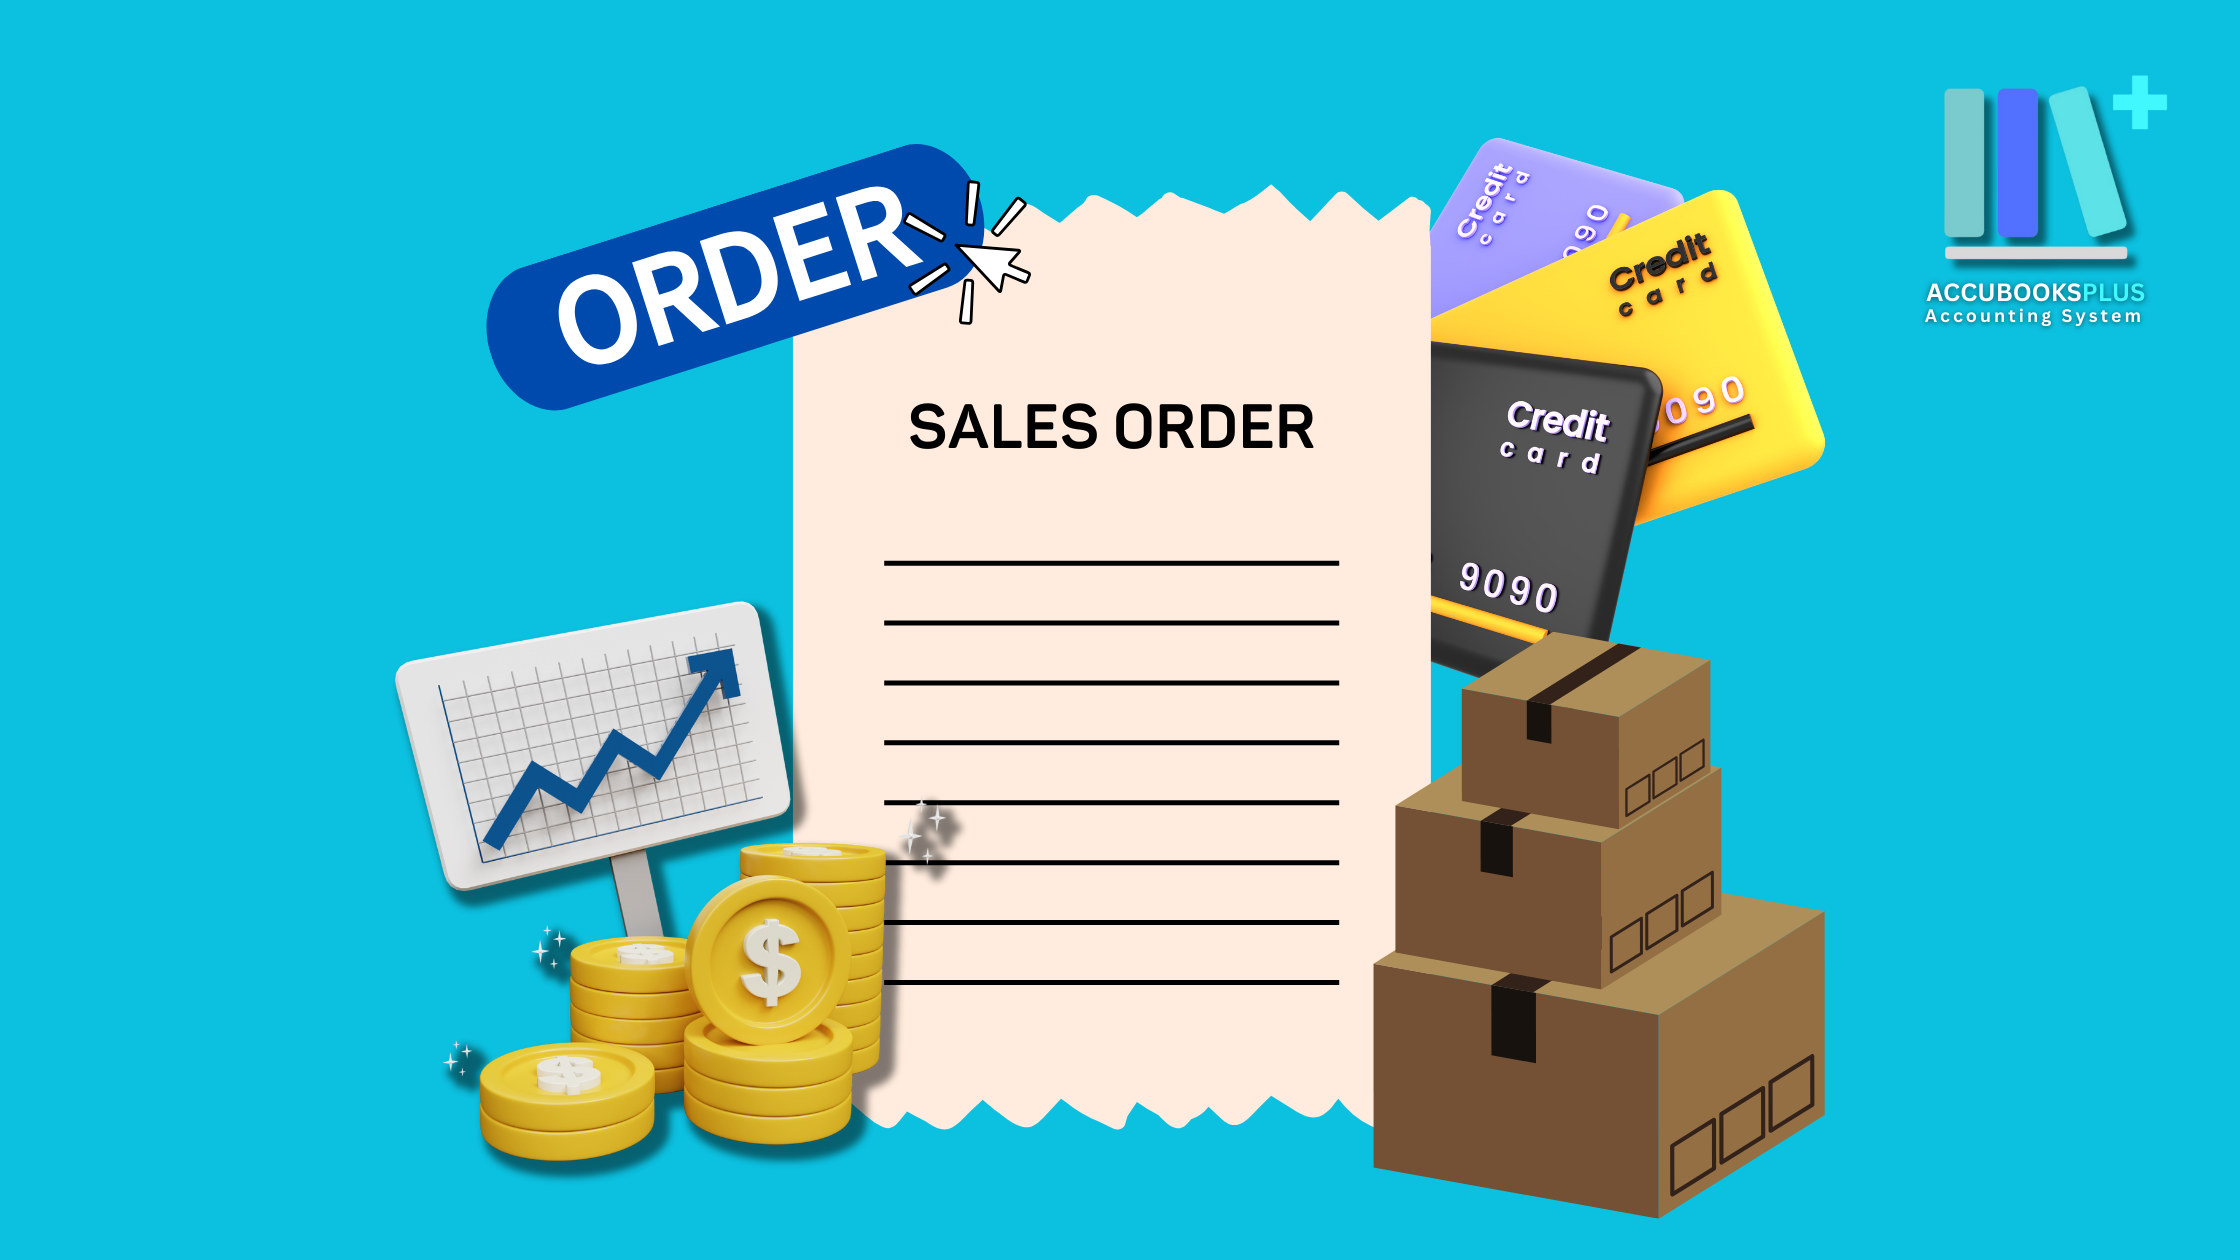 What is a Sales Order?